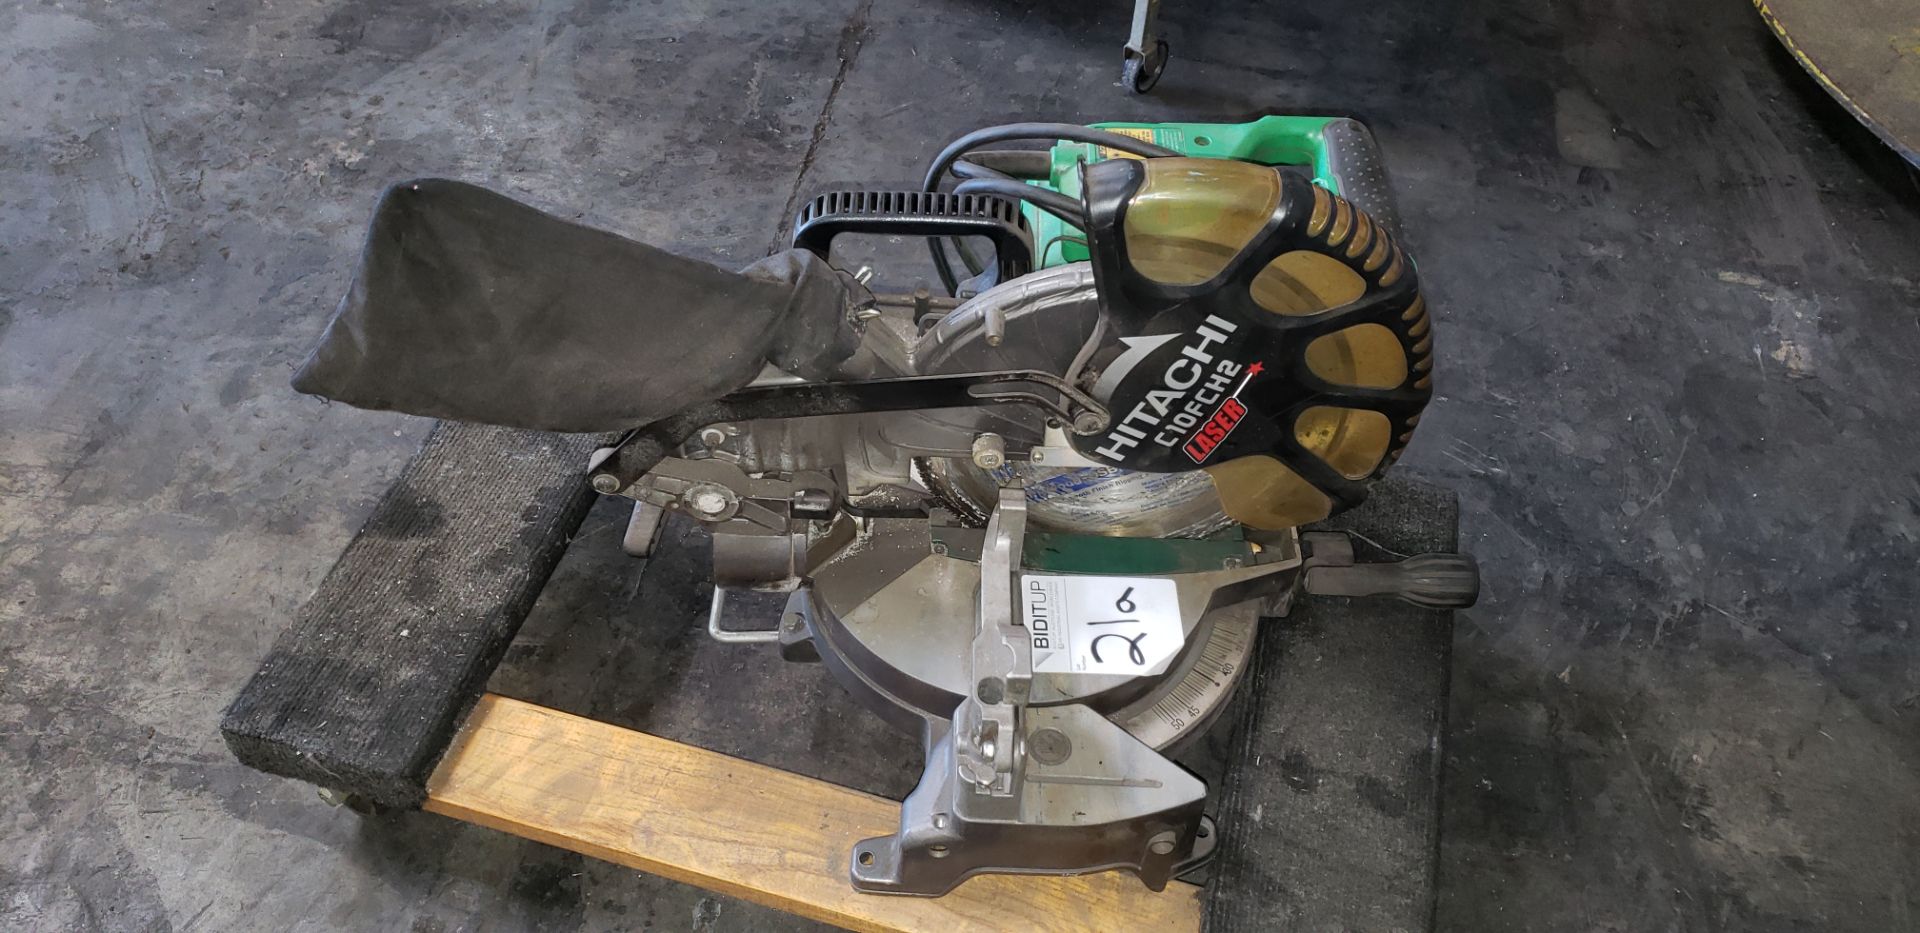 Hitachi, Mdl: C10-FCH2 10" Compound Miter Saw V-120, AMPs 15, HZ 60, 1520W , S/N: C581157, Located - Image 2 of 4